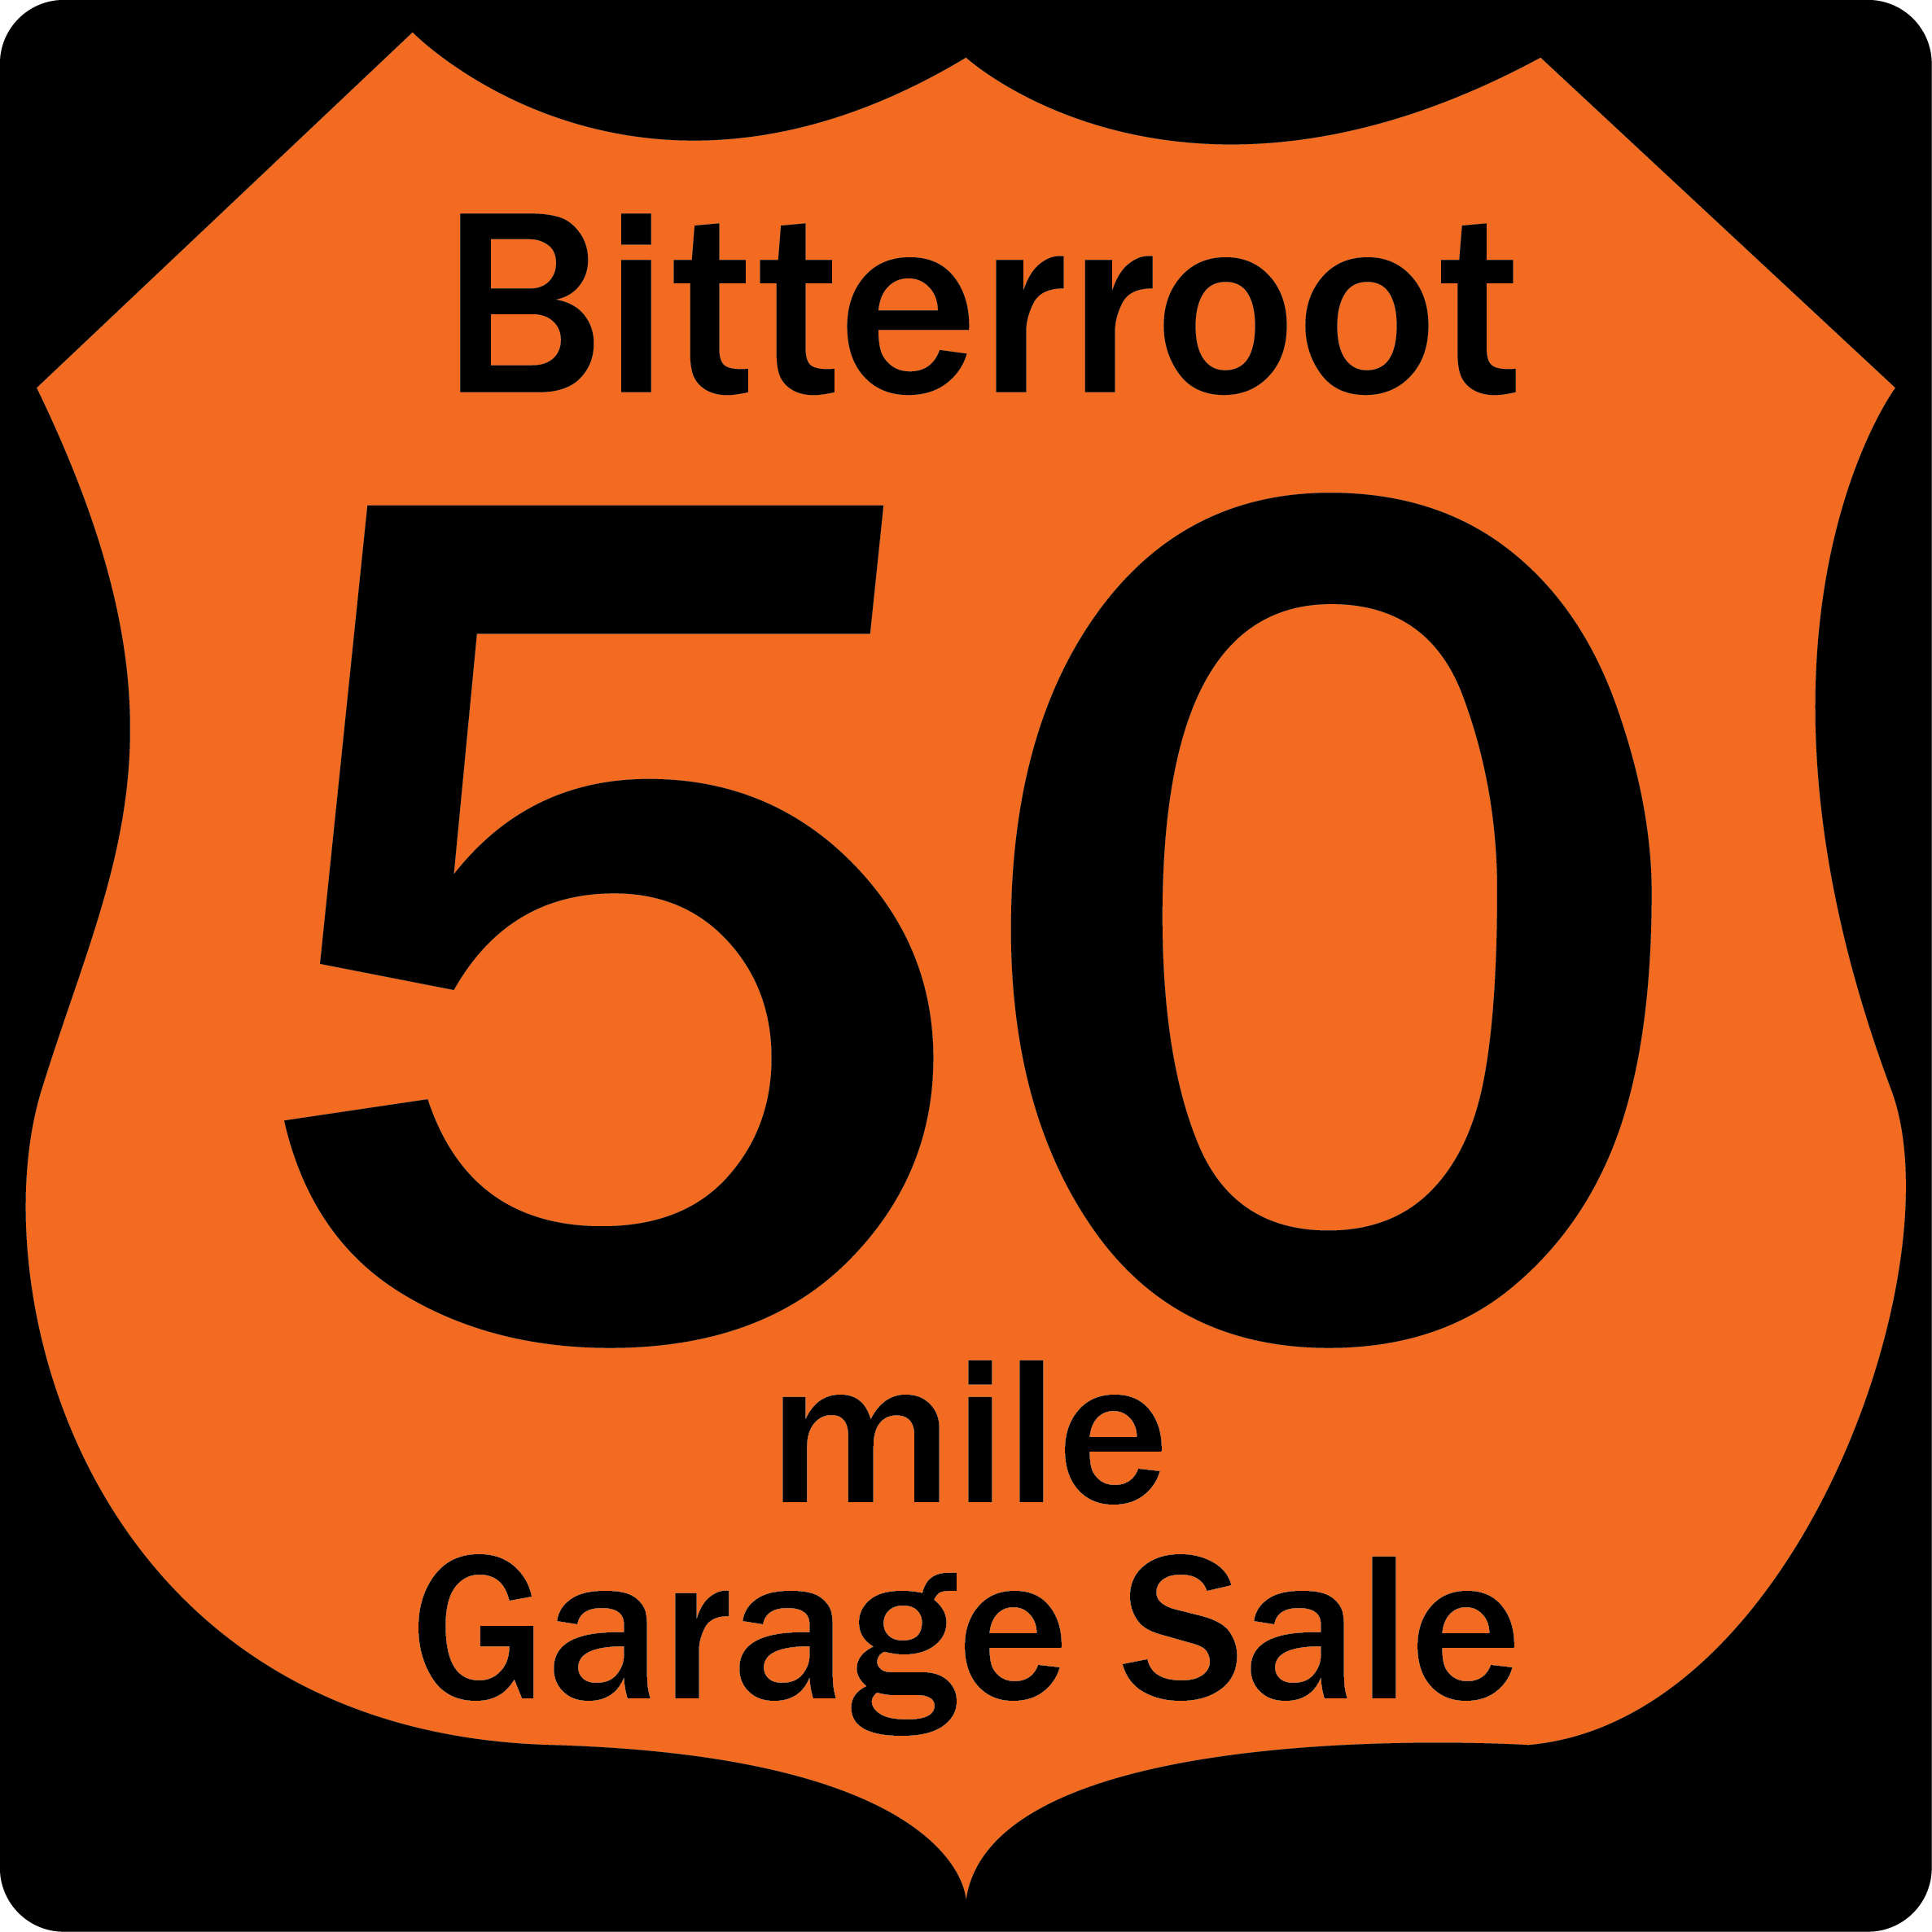 Kick off The 50 Mile with Blue Jay Estate Sales LLC